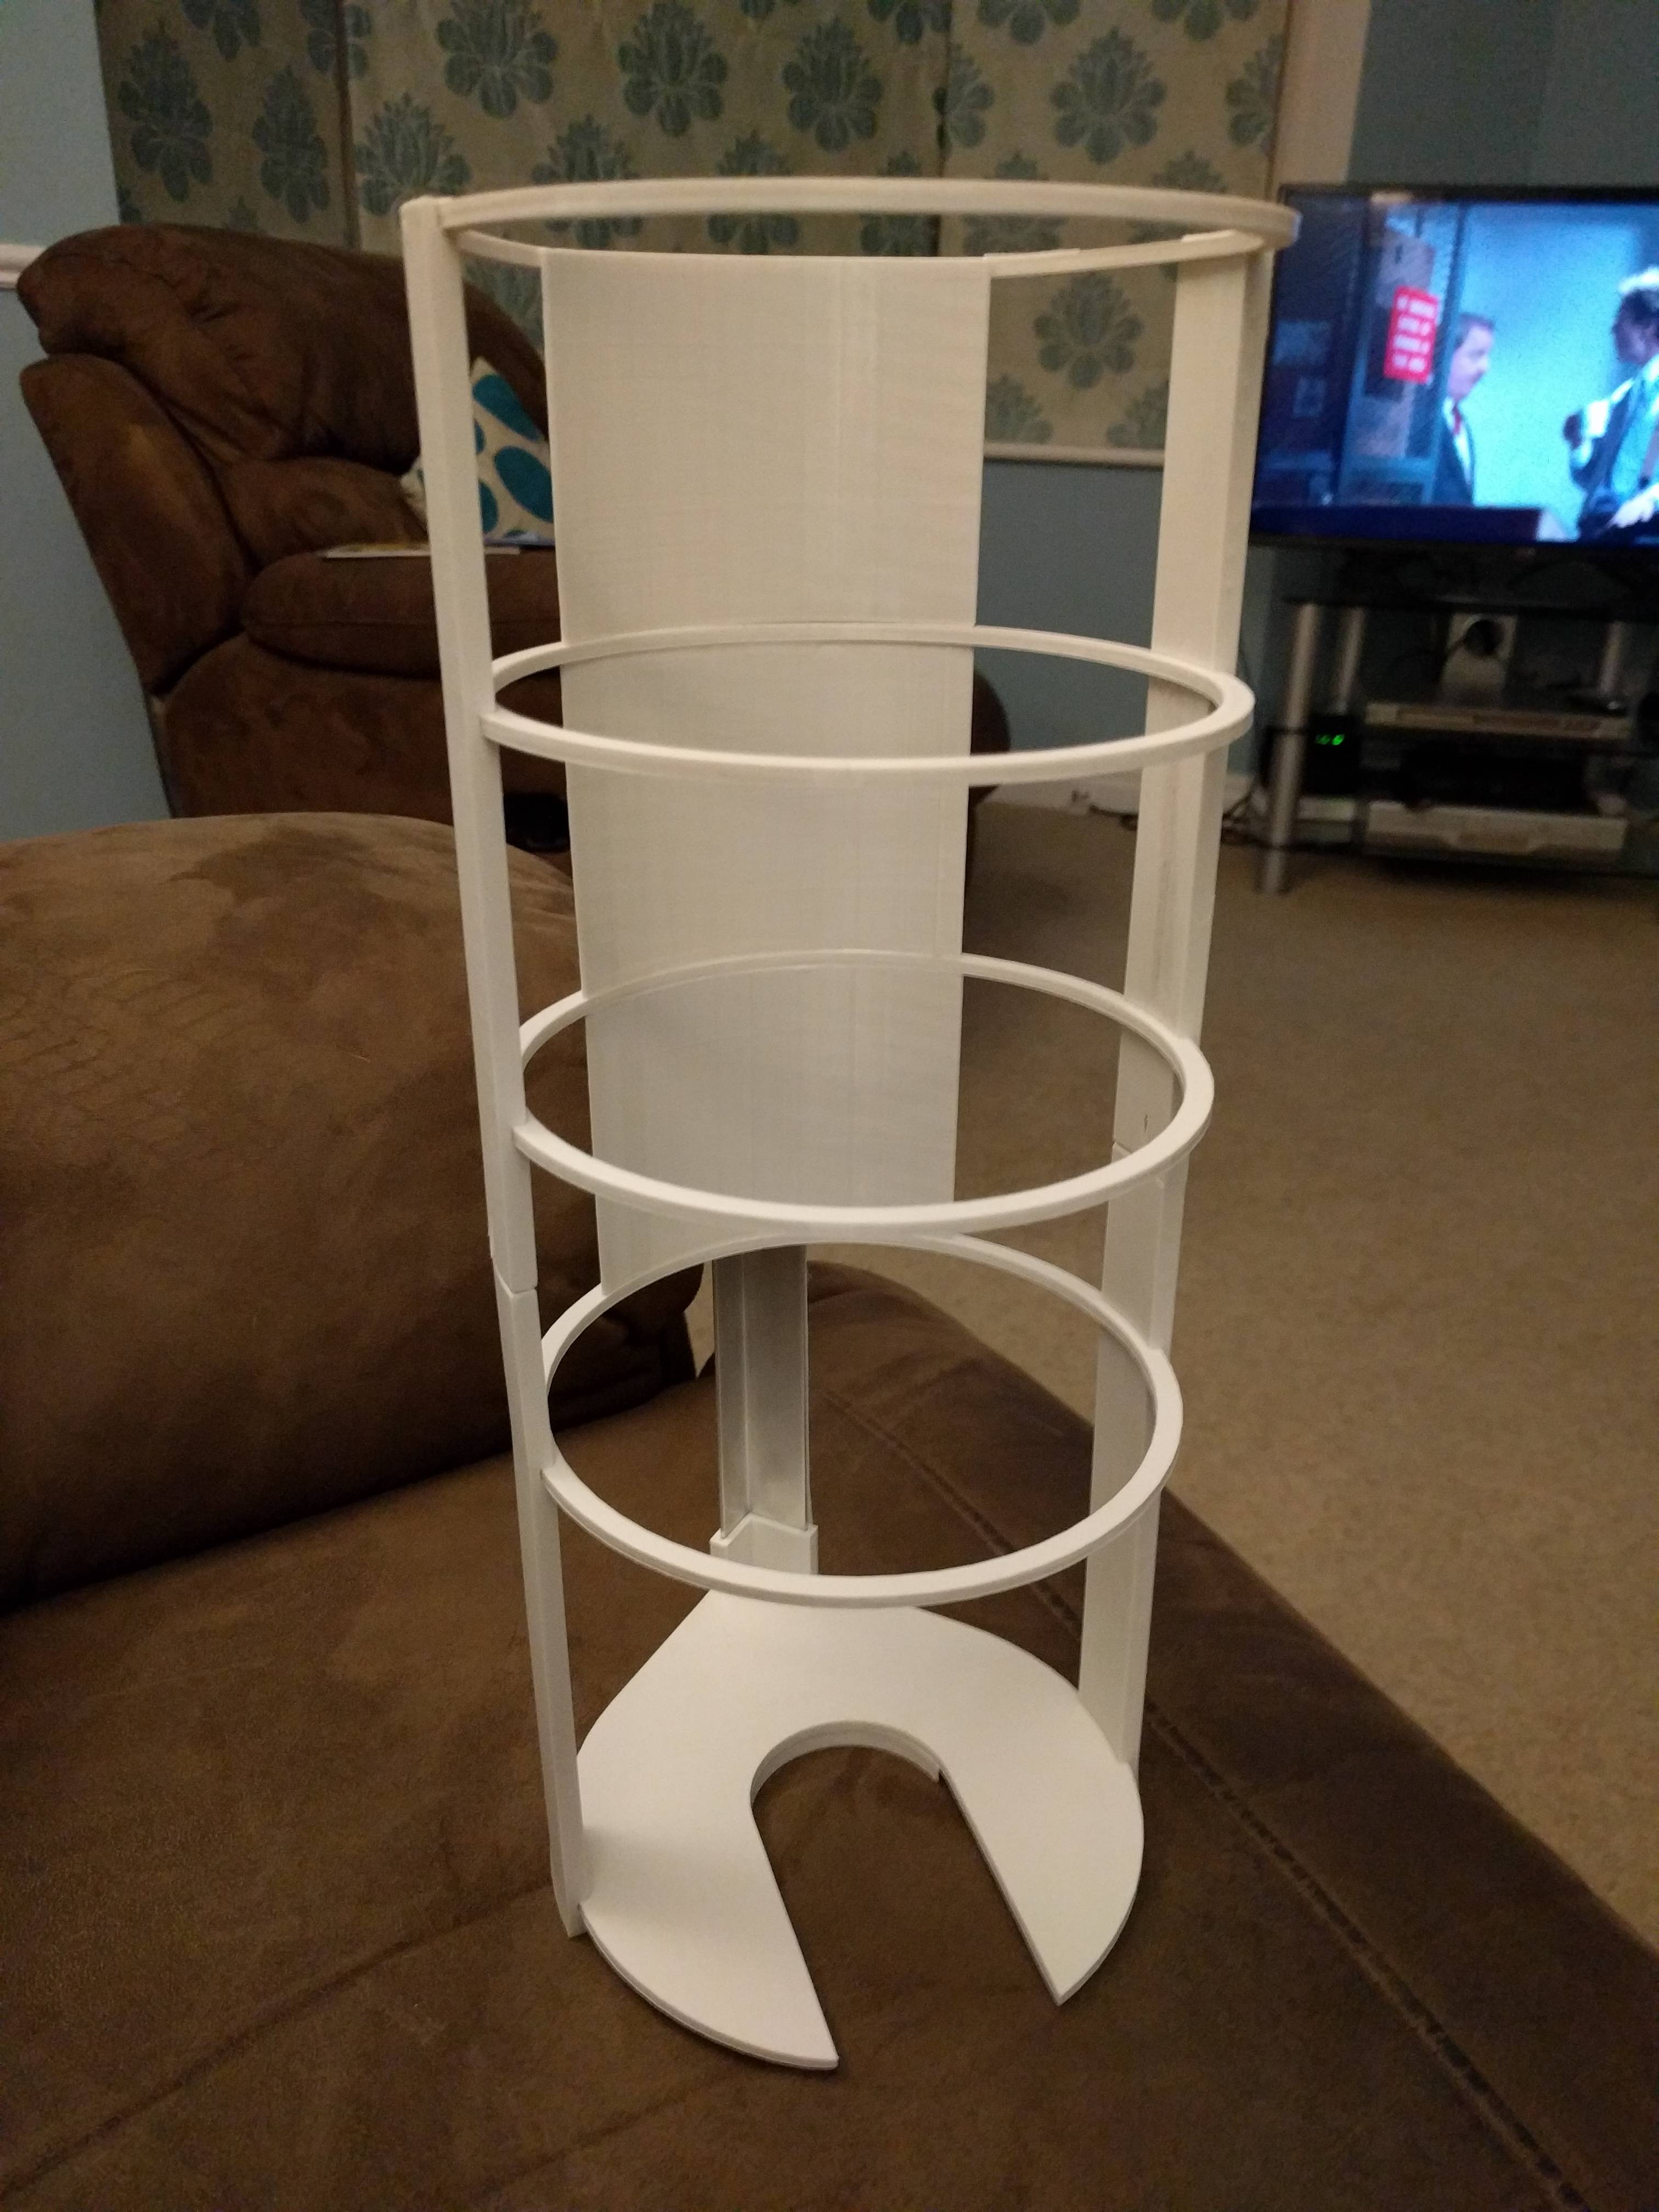 3D Print a Toilet Paper Roll Dispenser to Solve All of ...